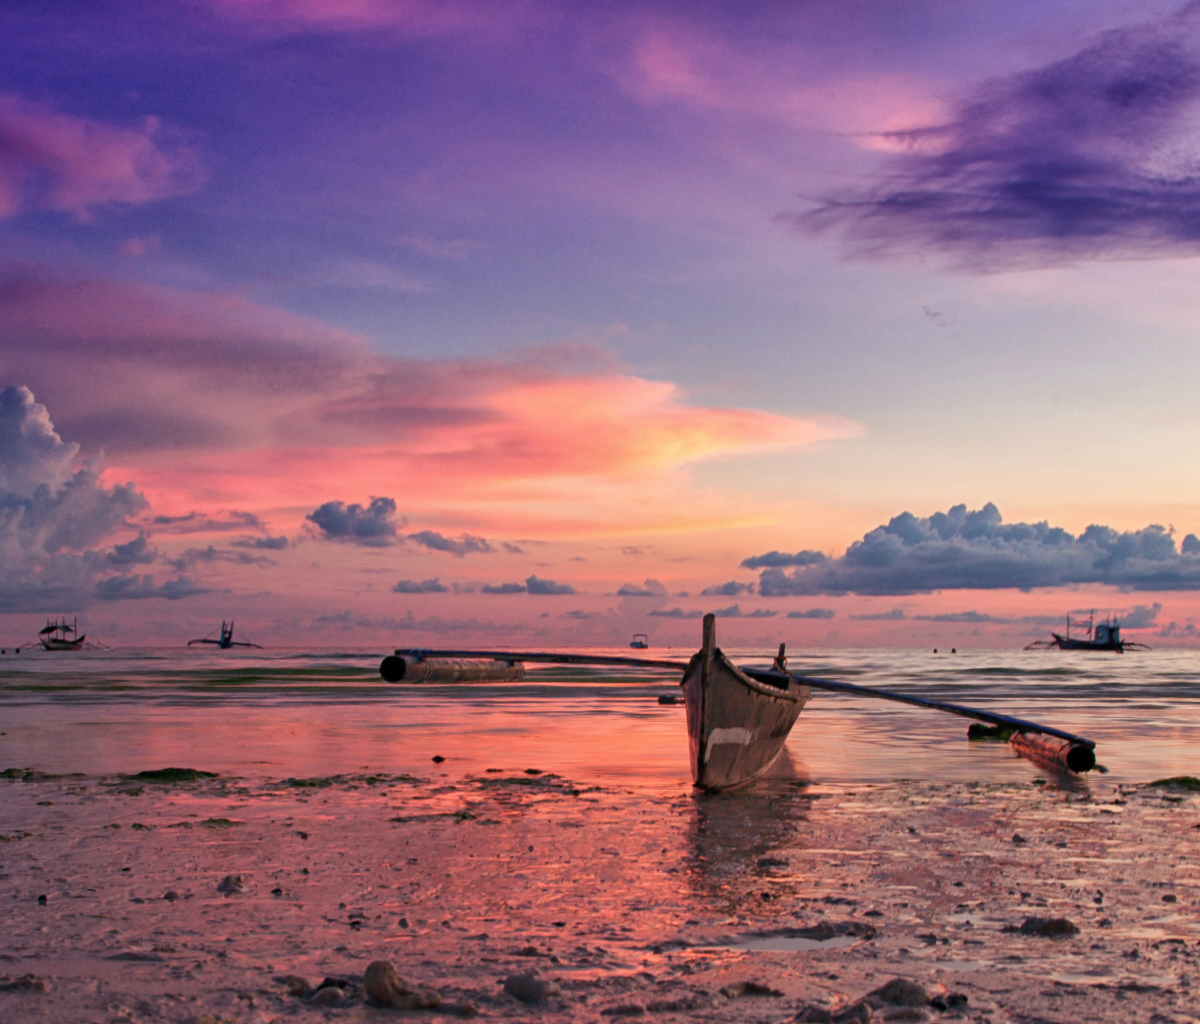 Pink Sunset And Boat At Beach In Philippines screenshot #1 1200x1024